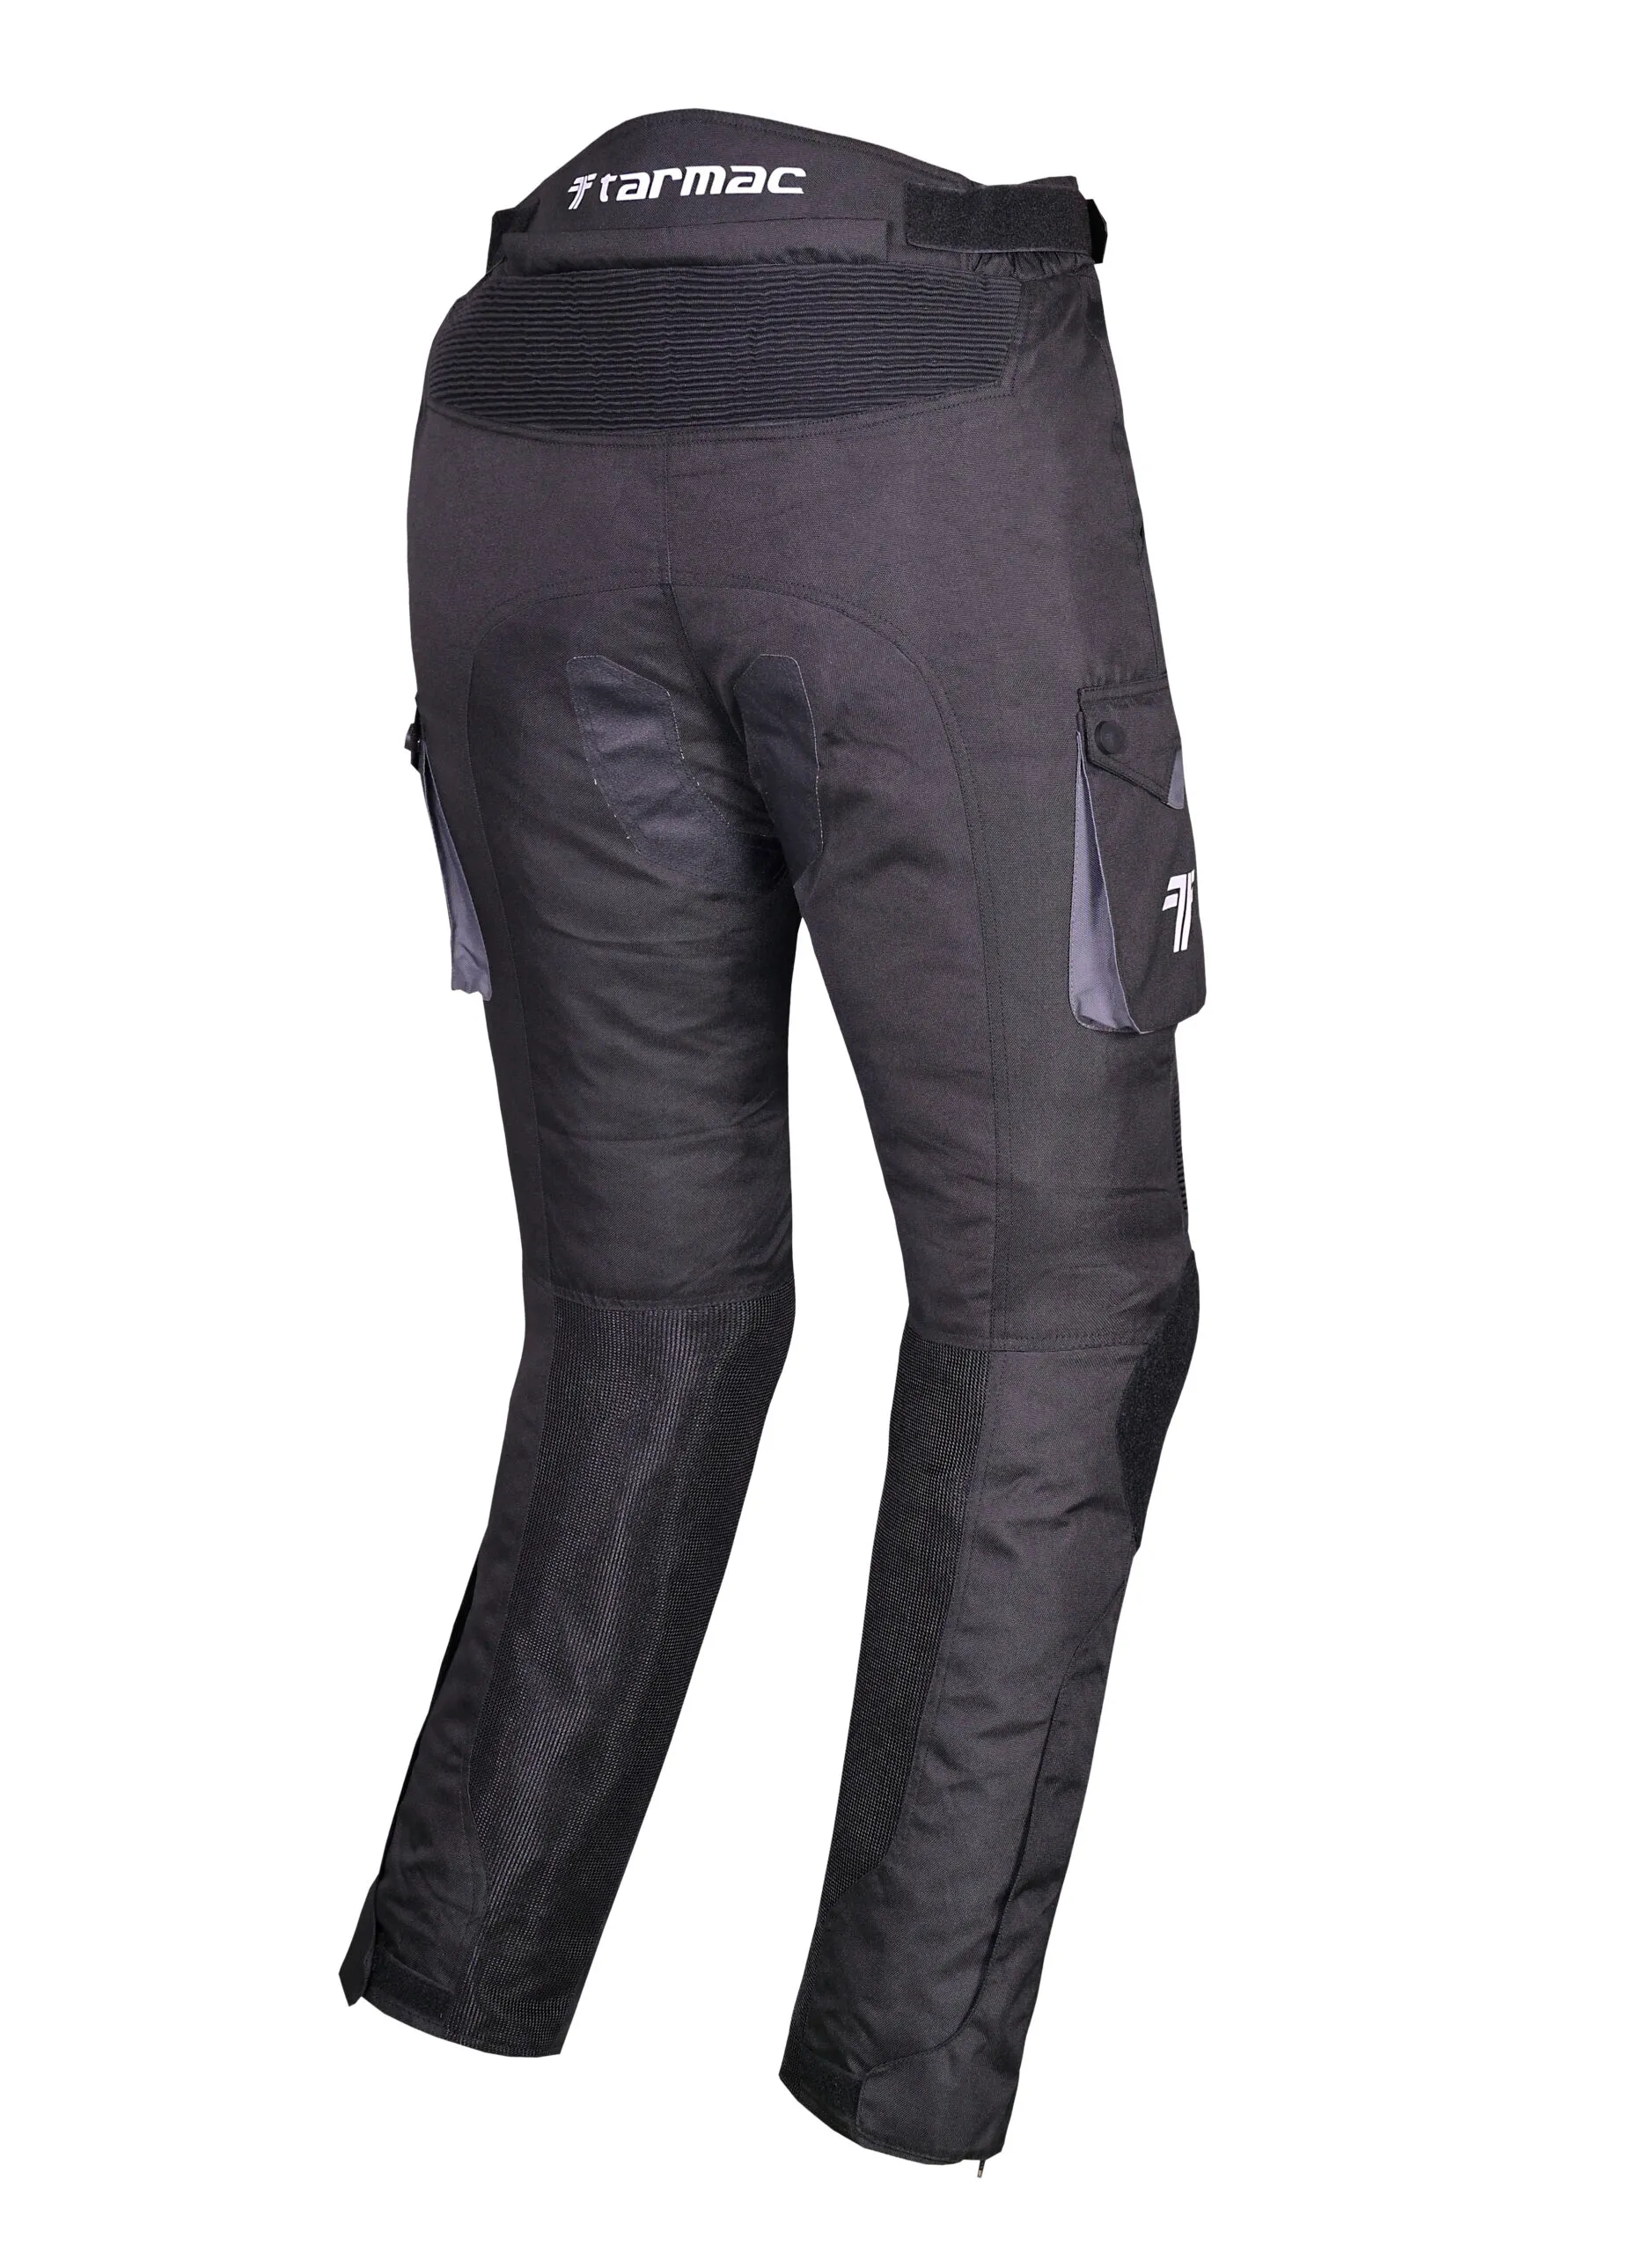 RYNOX STEALTH AIR PRO RIDING PANT - YouTube